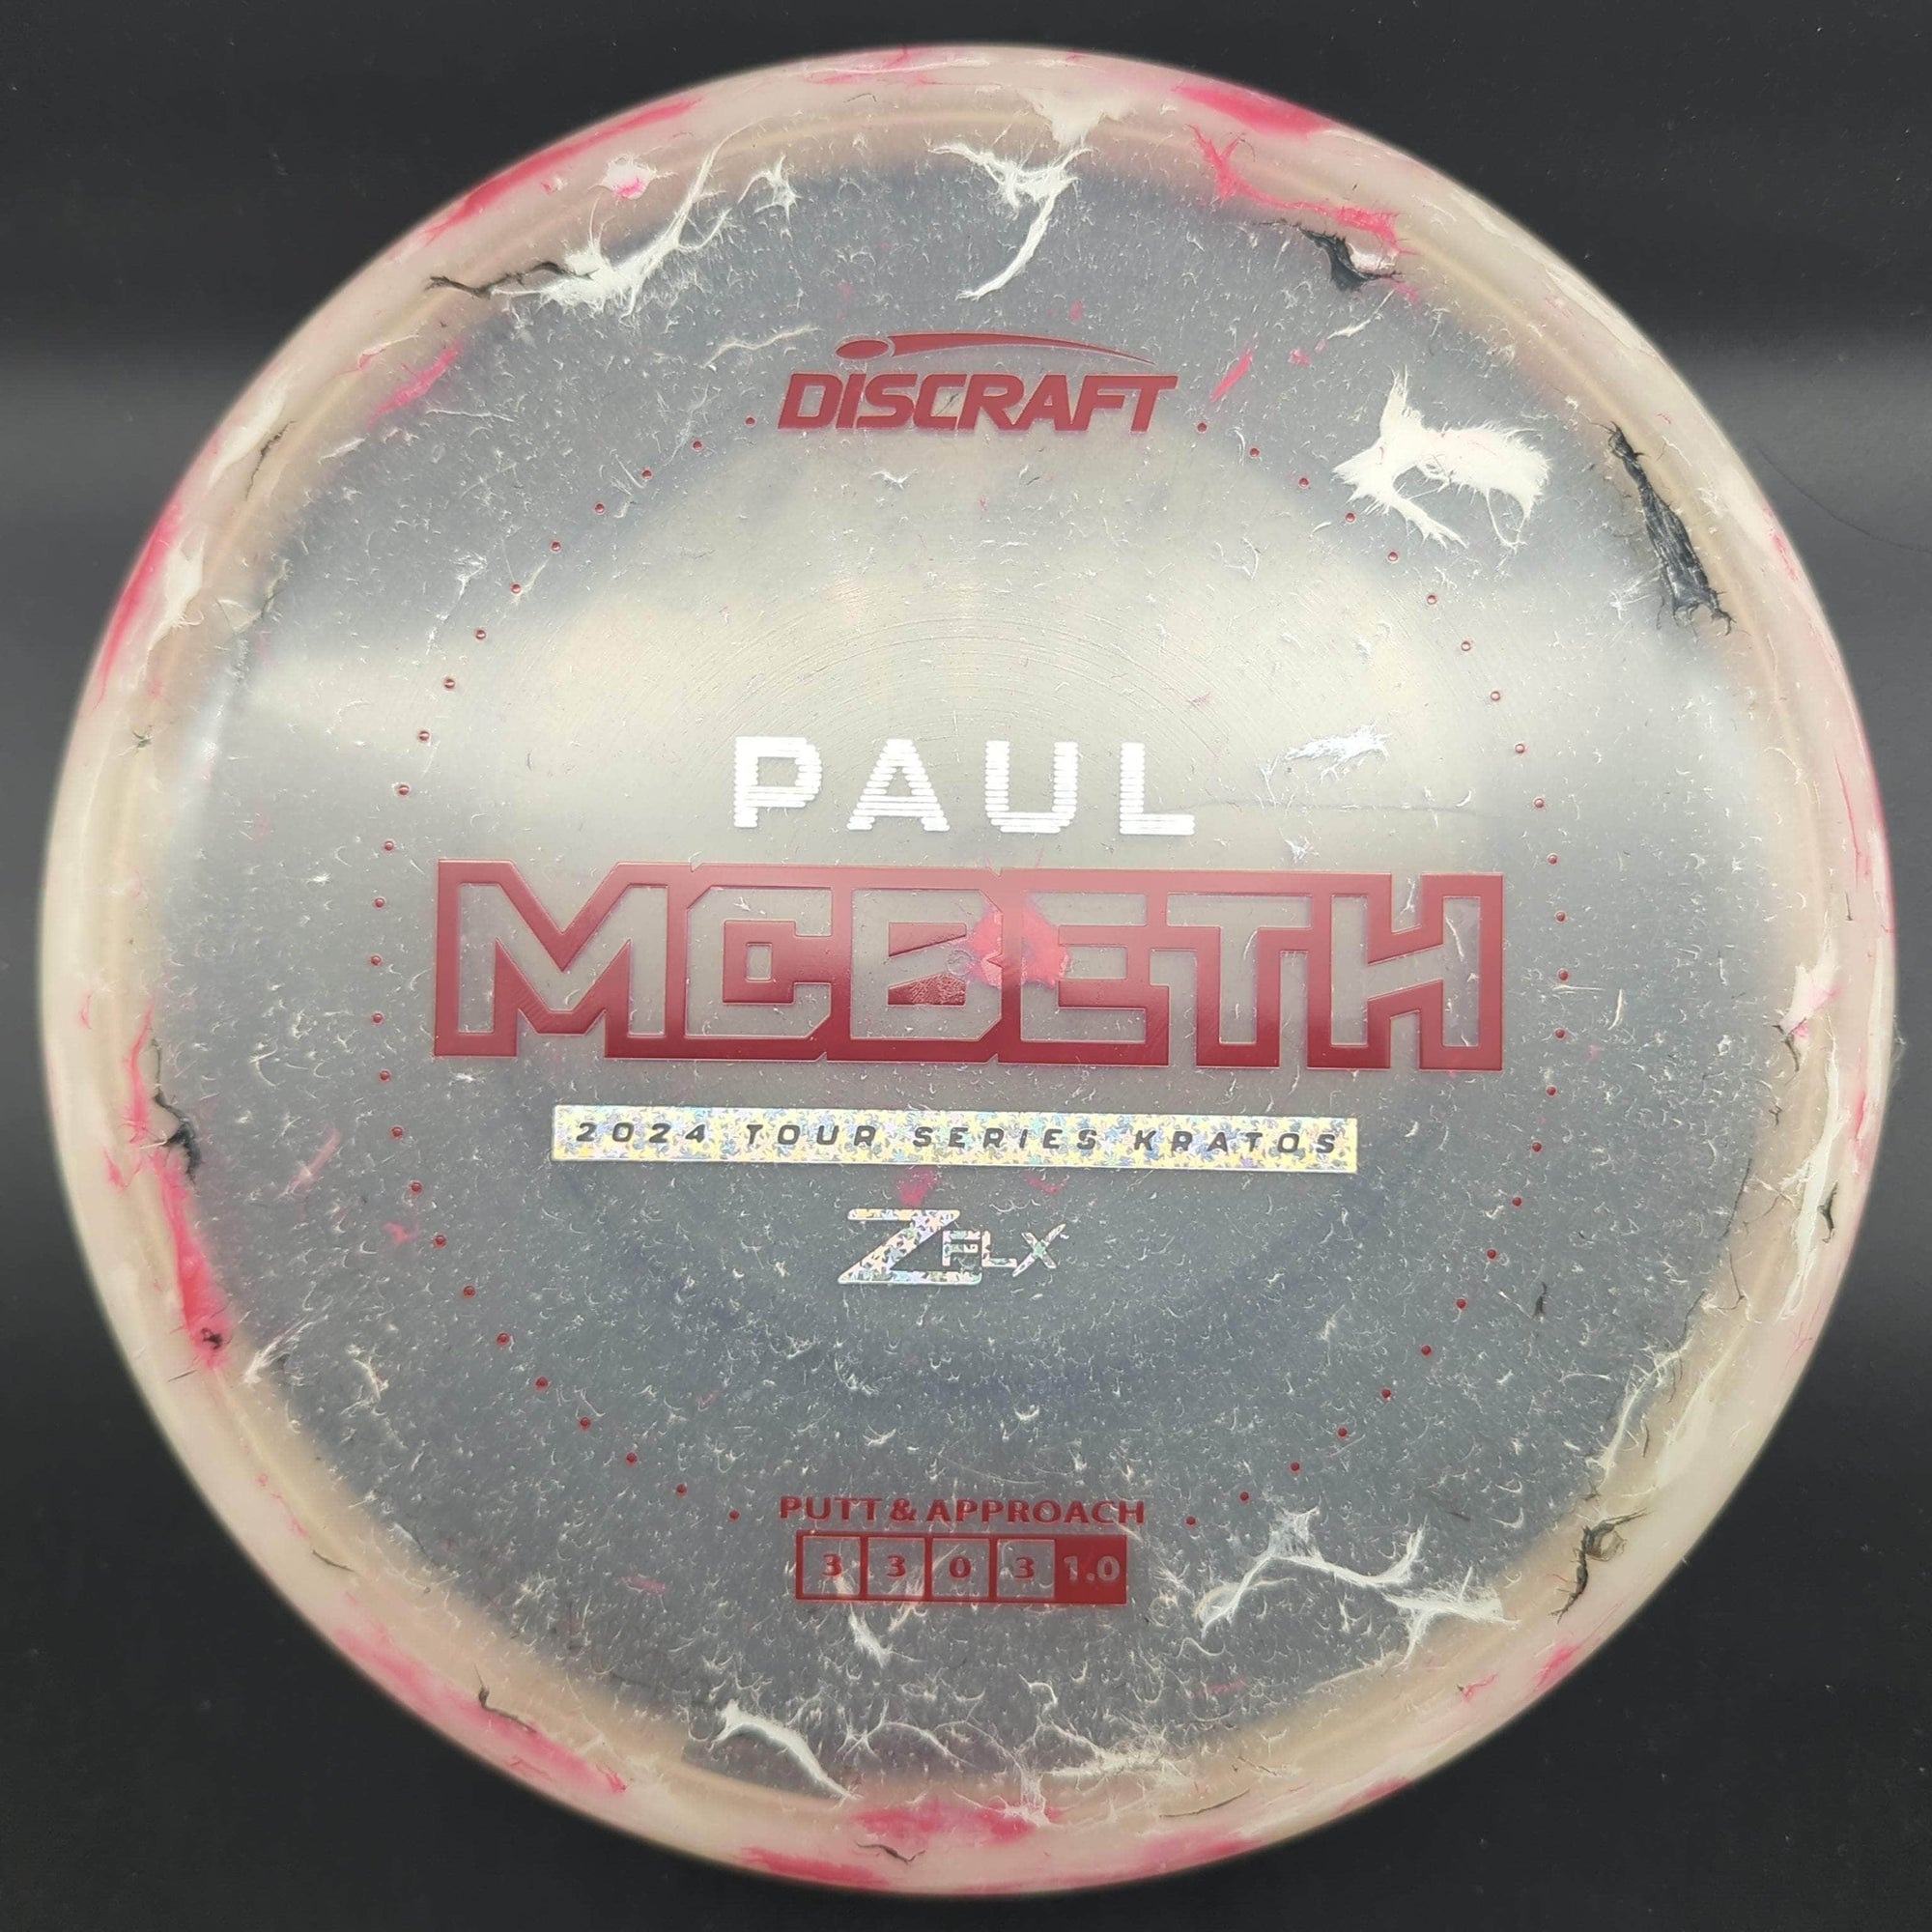 Discraft Putter White/Red Silver/Red Stamp 174g Kratos, Zflx, Paul McBeth Tour Series 2024